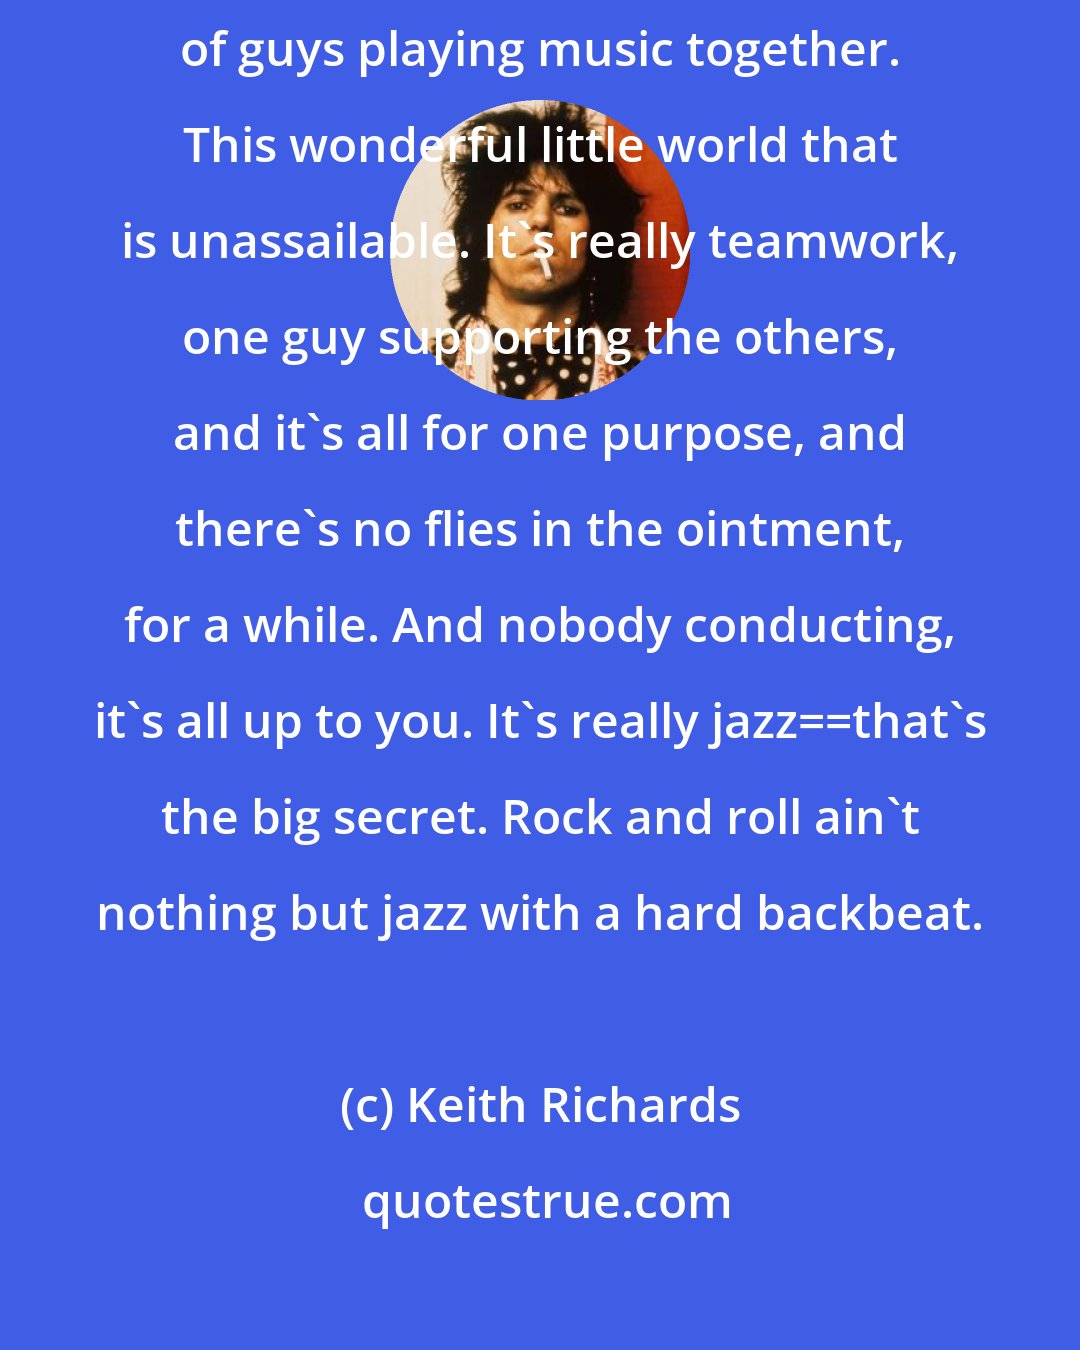 Keith Richards: There's something beautifully friendly and elevating about a bunch of guys playing music together. This wonderful little world that is unassailable. It's really teamwork, one guy supporting the others, and it's all for one purpose, and there's no flies in the ointment, for a while. And nobody conducting, it's all up to you. It's really jazz__that's the big secret. Rock and roll ain't nothing but jazz with a hard backbeat.